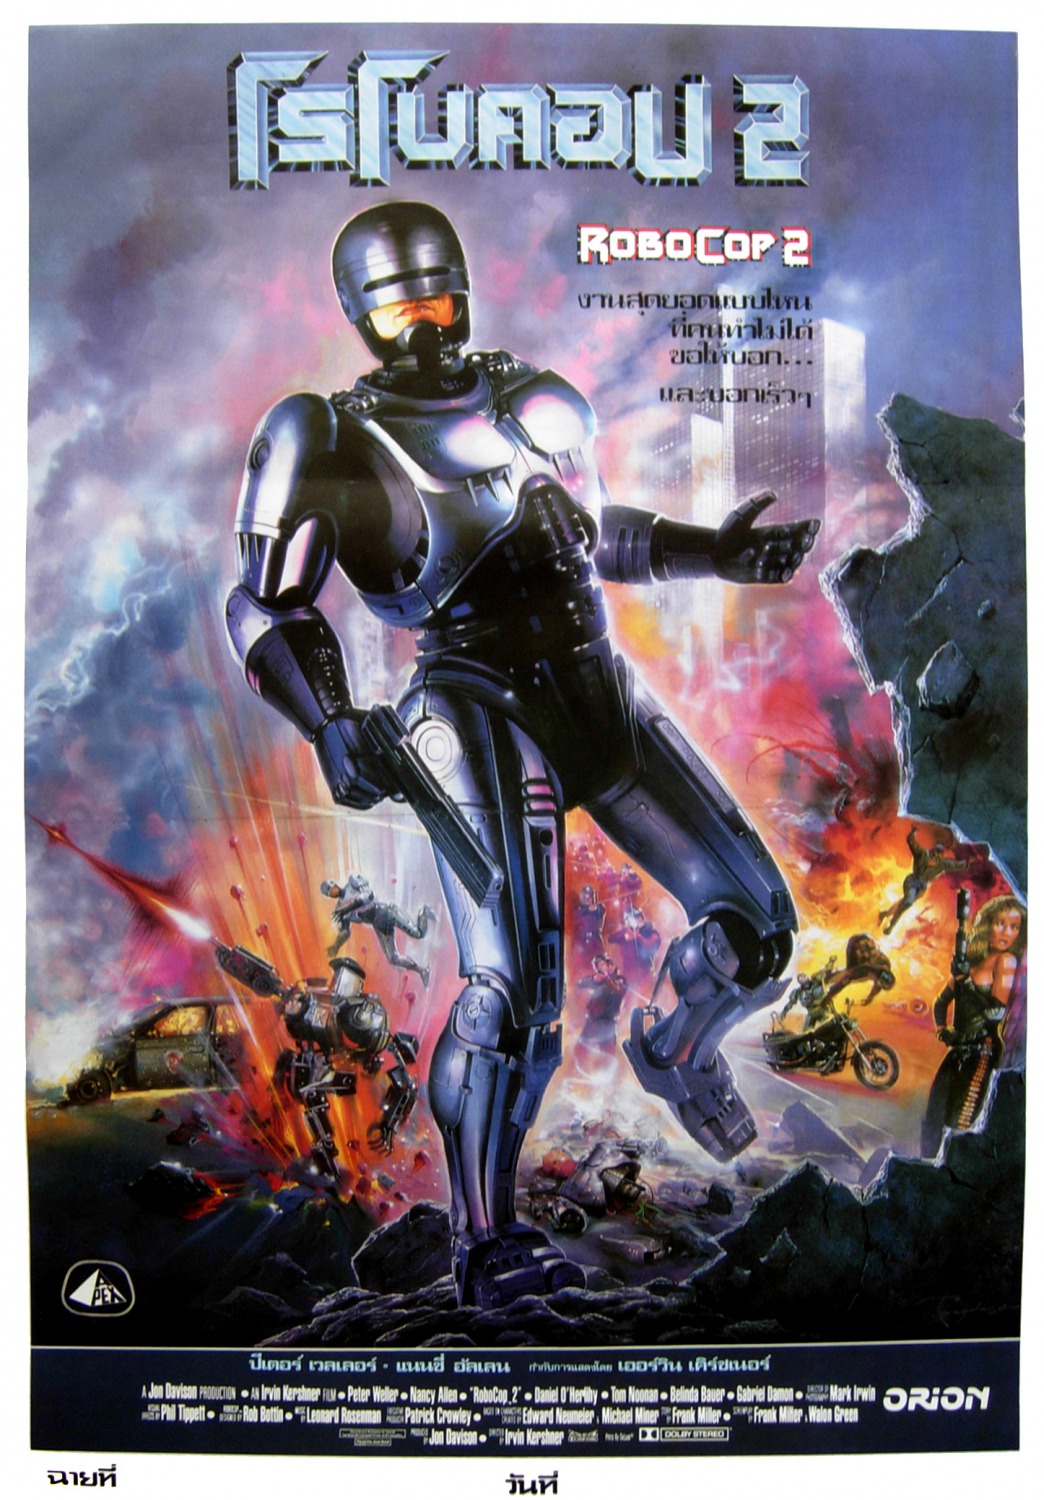 Extra Large Movie Poster Image for Robocop 2 (#4 of 4)